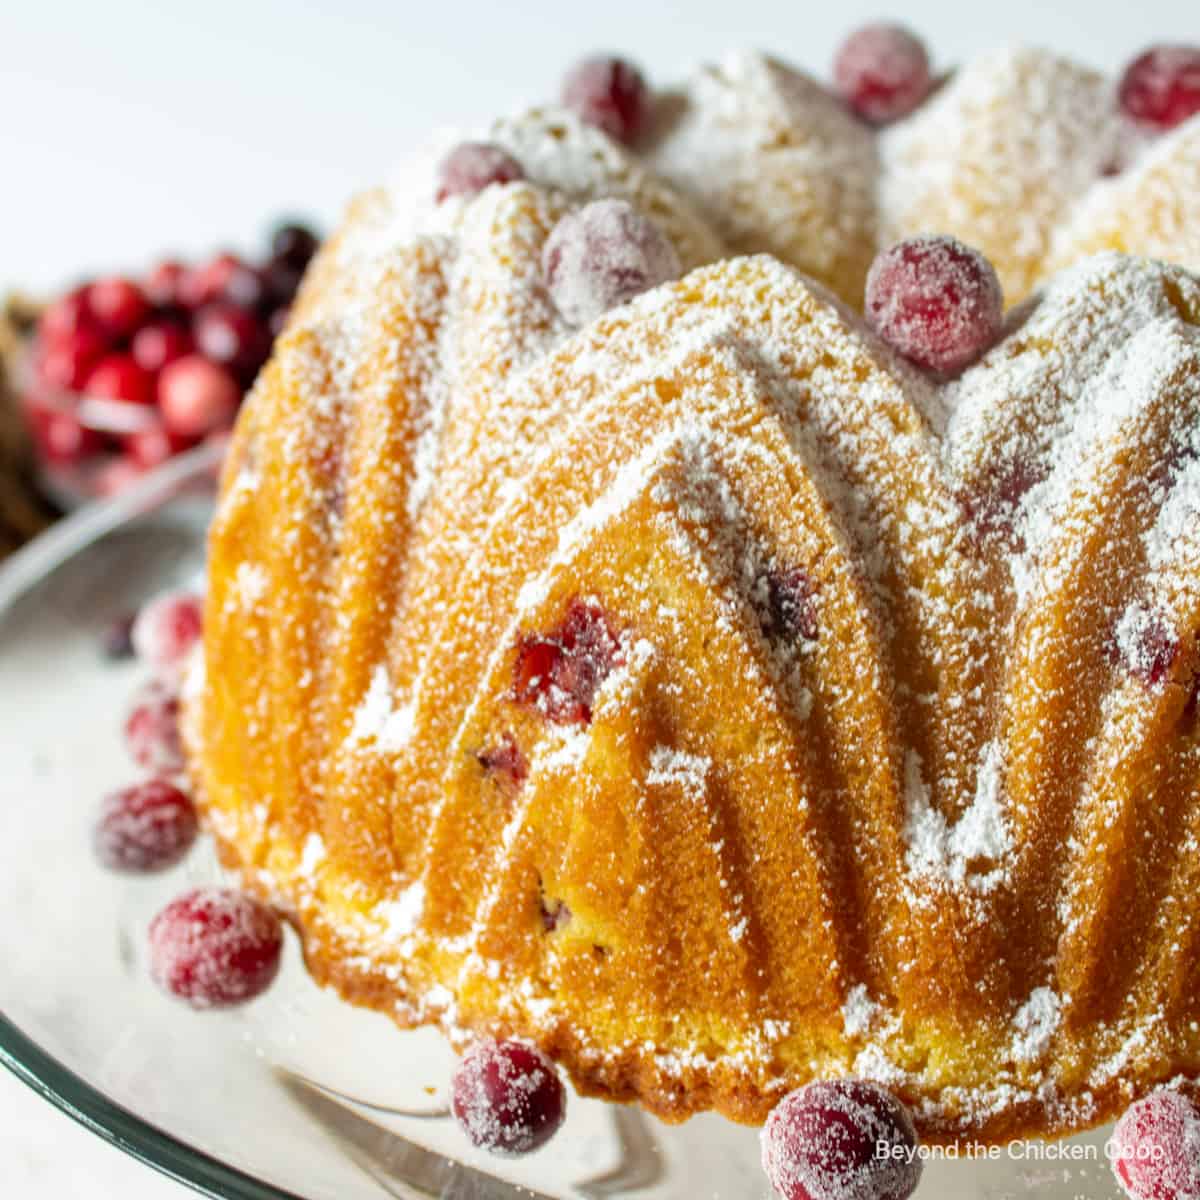 A bundt cake with sugared cranberries.